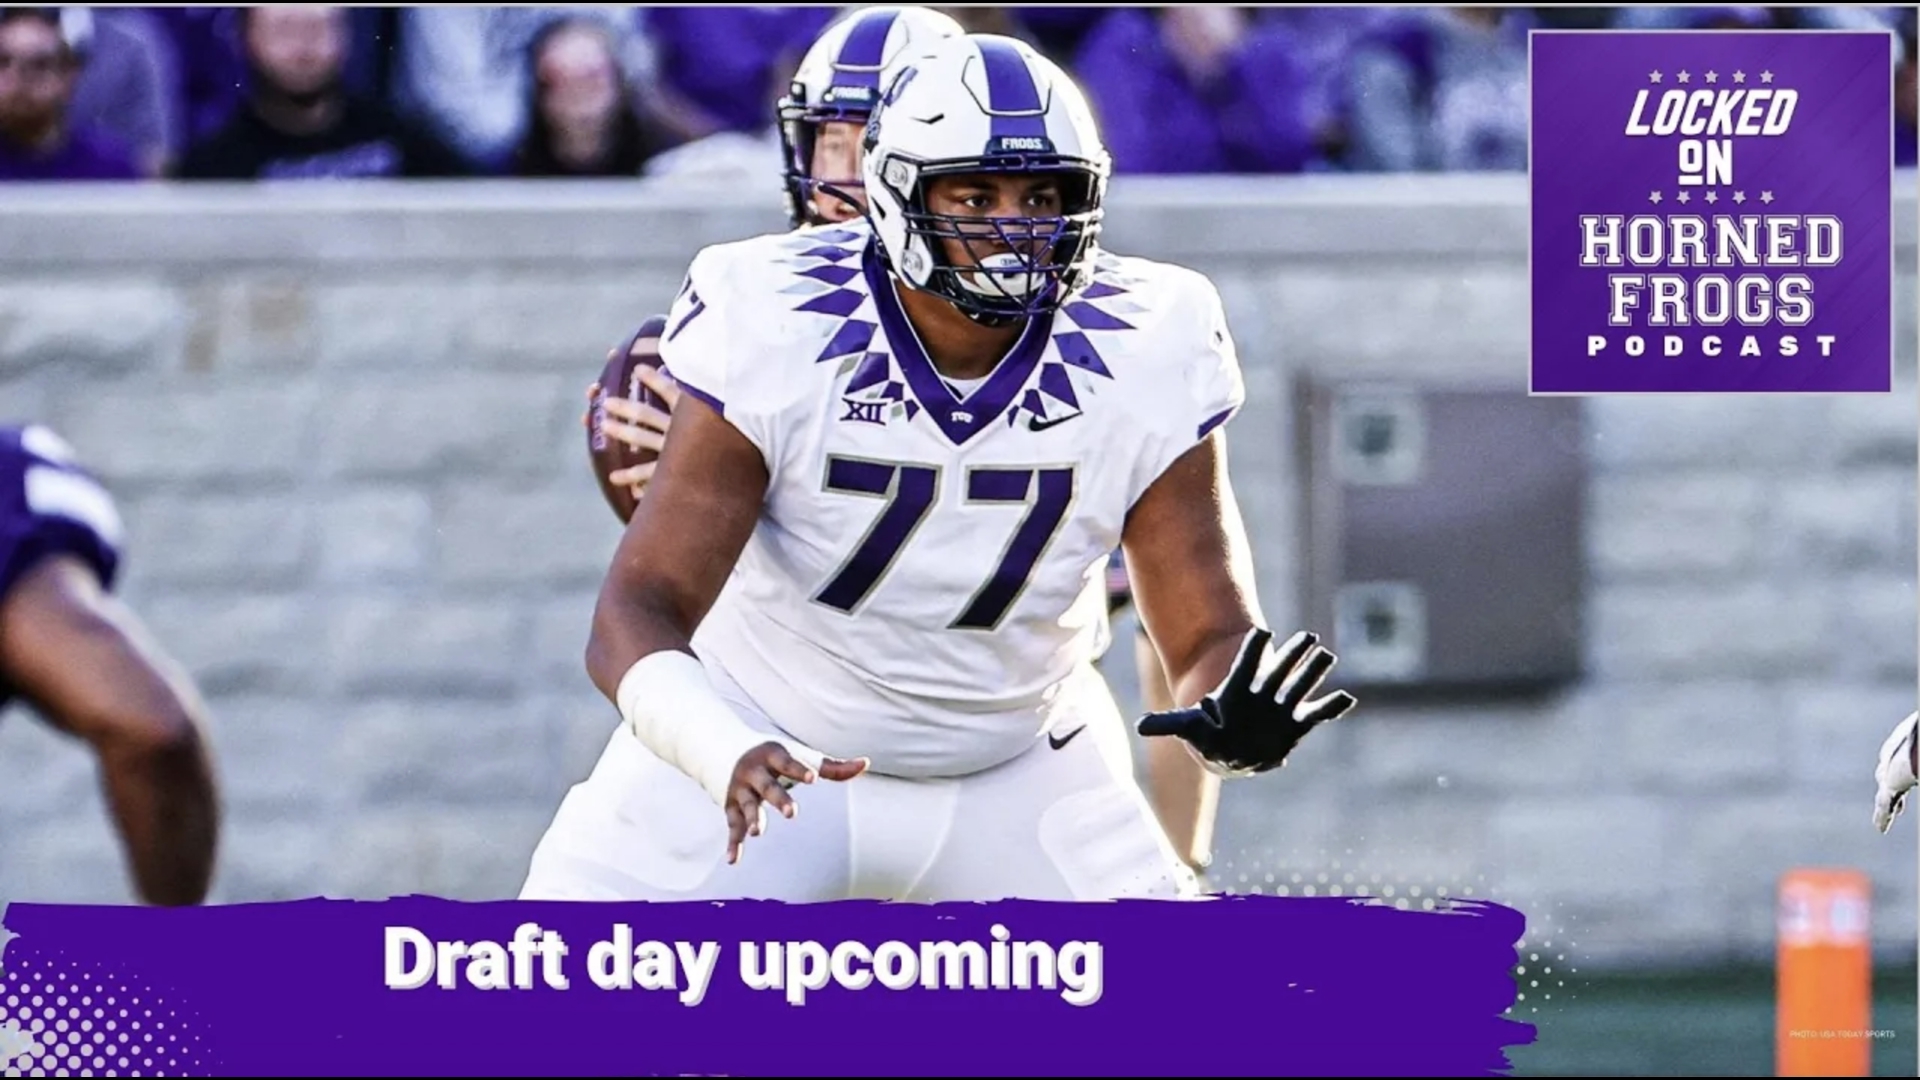 Where will some former Frogs land in the NFL draft this weekend?